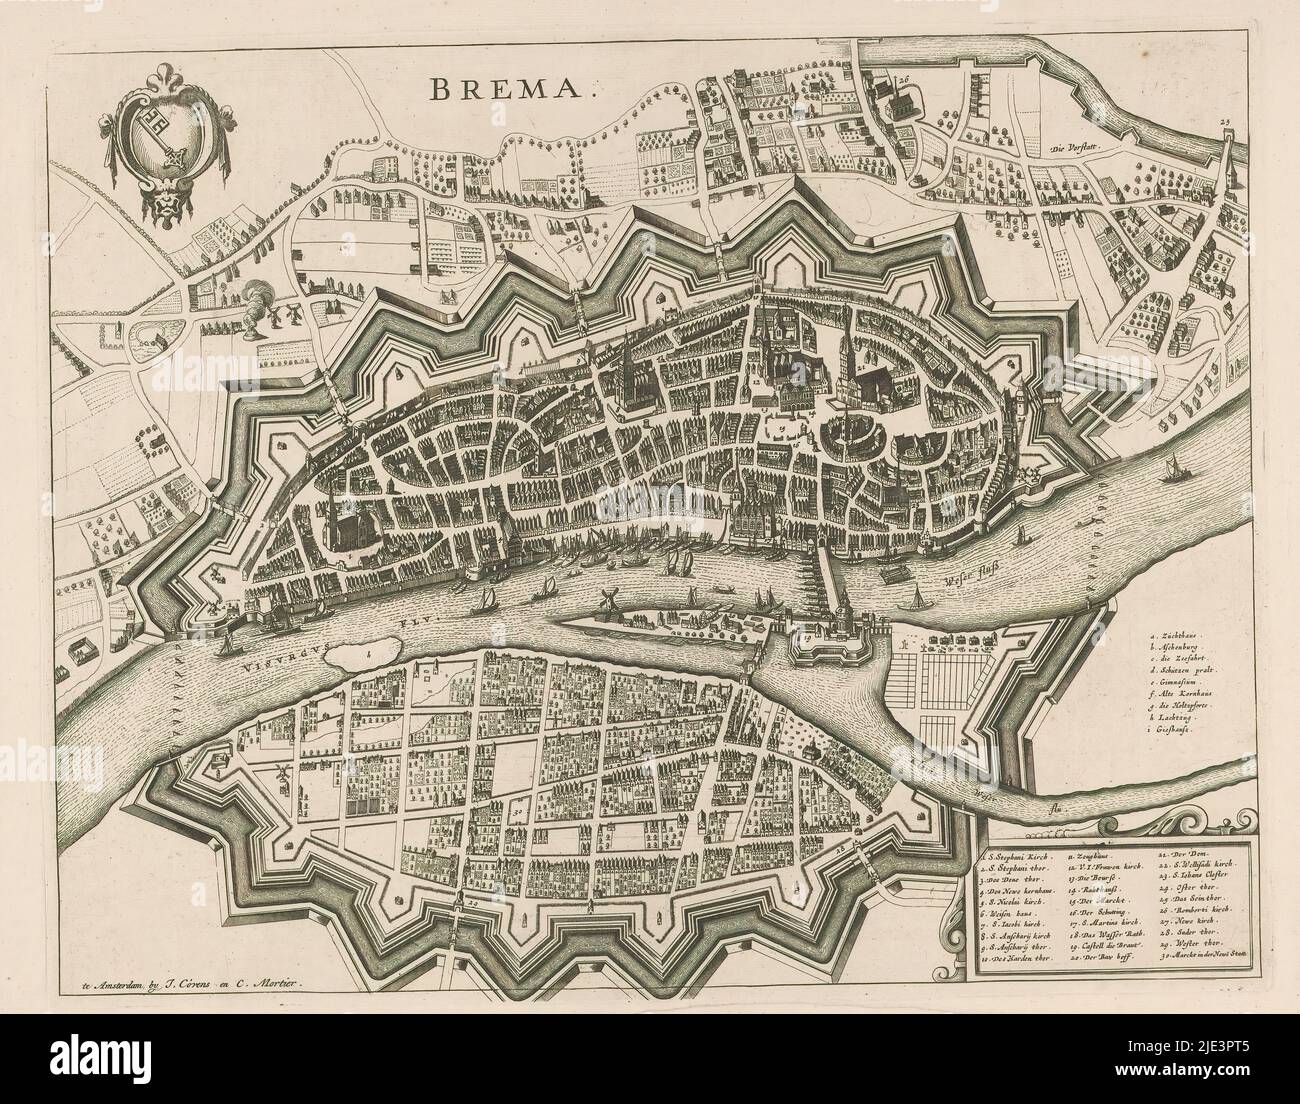 Map of Bremen, Brema (title on object), print maker: anonymous, publisher: Covens & Mortier, (mentioned on object), Amsterdam, 1657 and/or 1728 - 1774, paper, engraving, etching, height 399 mm × width 506 mm Stock Photo